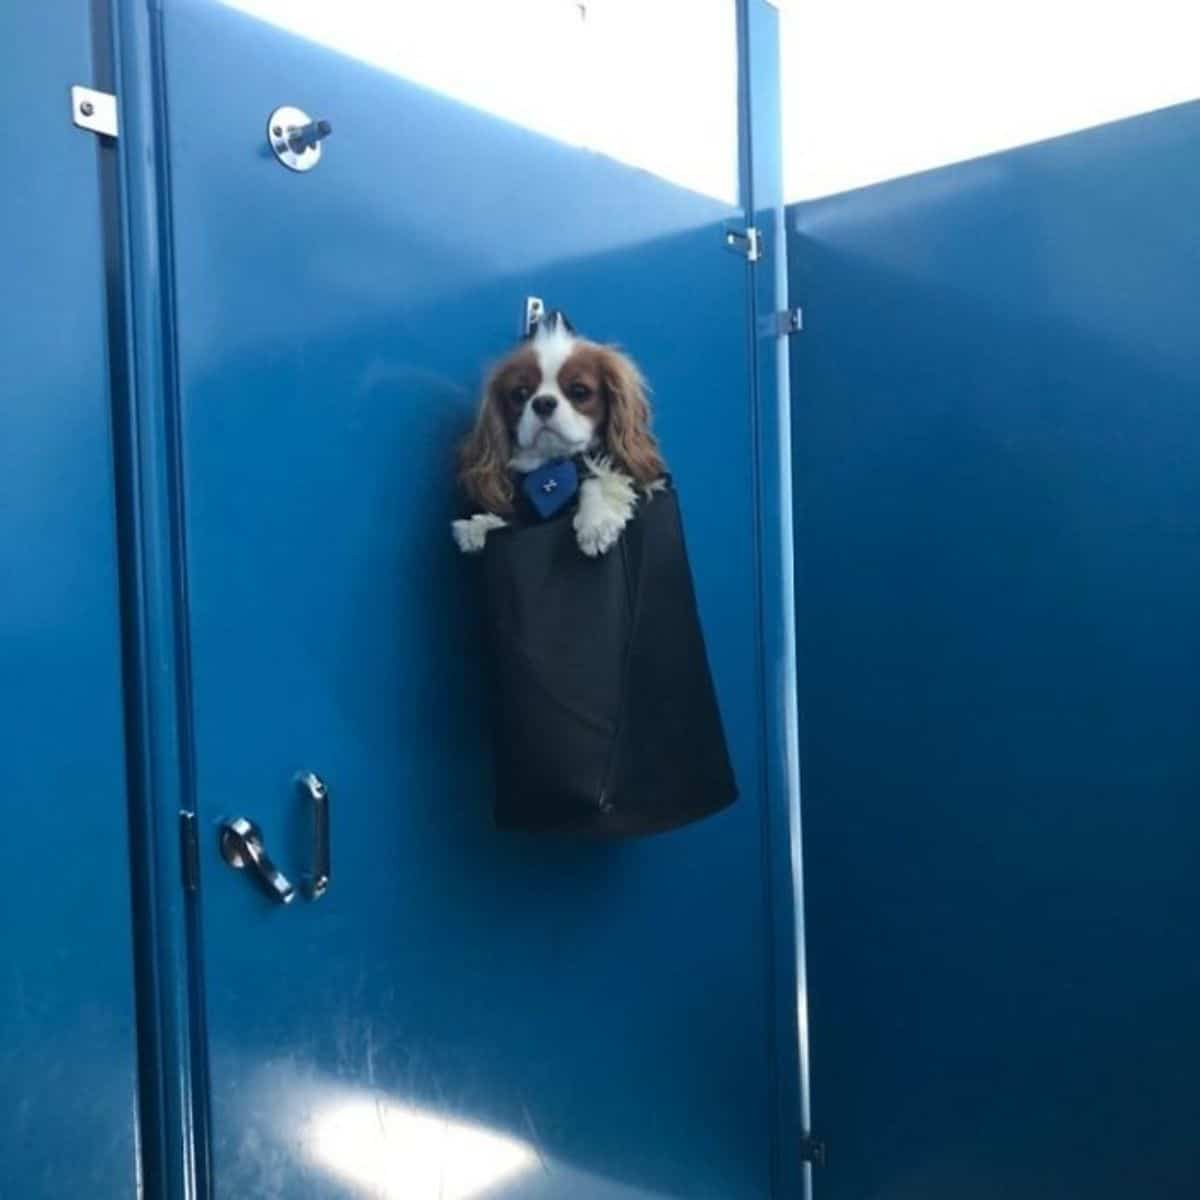 brown and white spaniel in a black bag hanging from the hook of a blue door